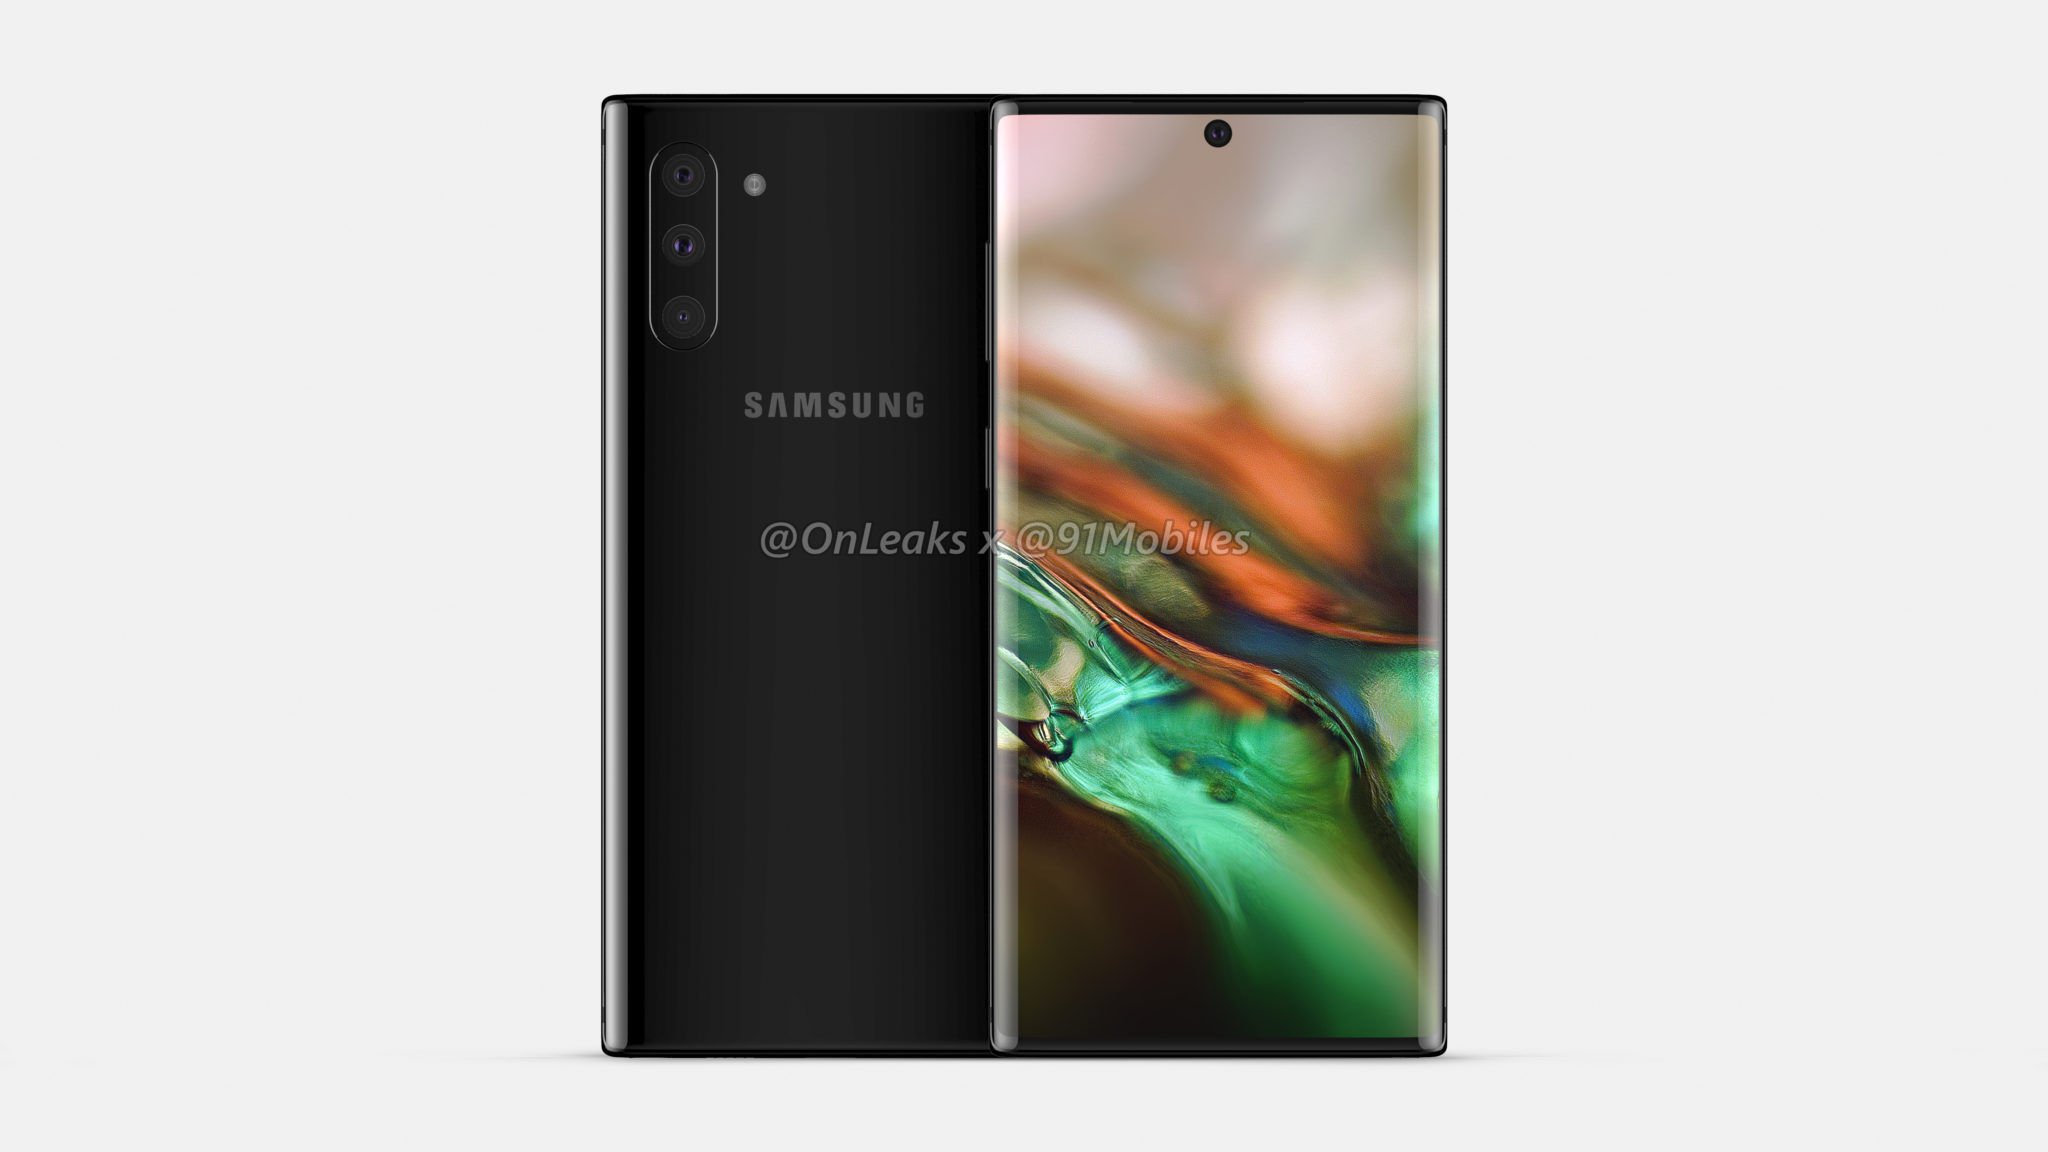 Samsung Galaxy Note 10 5G benchmark suggests Qualcomm SD855 and 12GB RAM